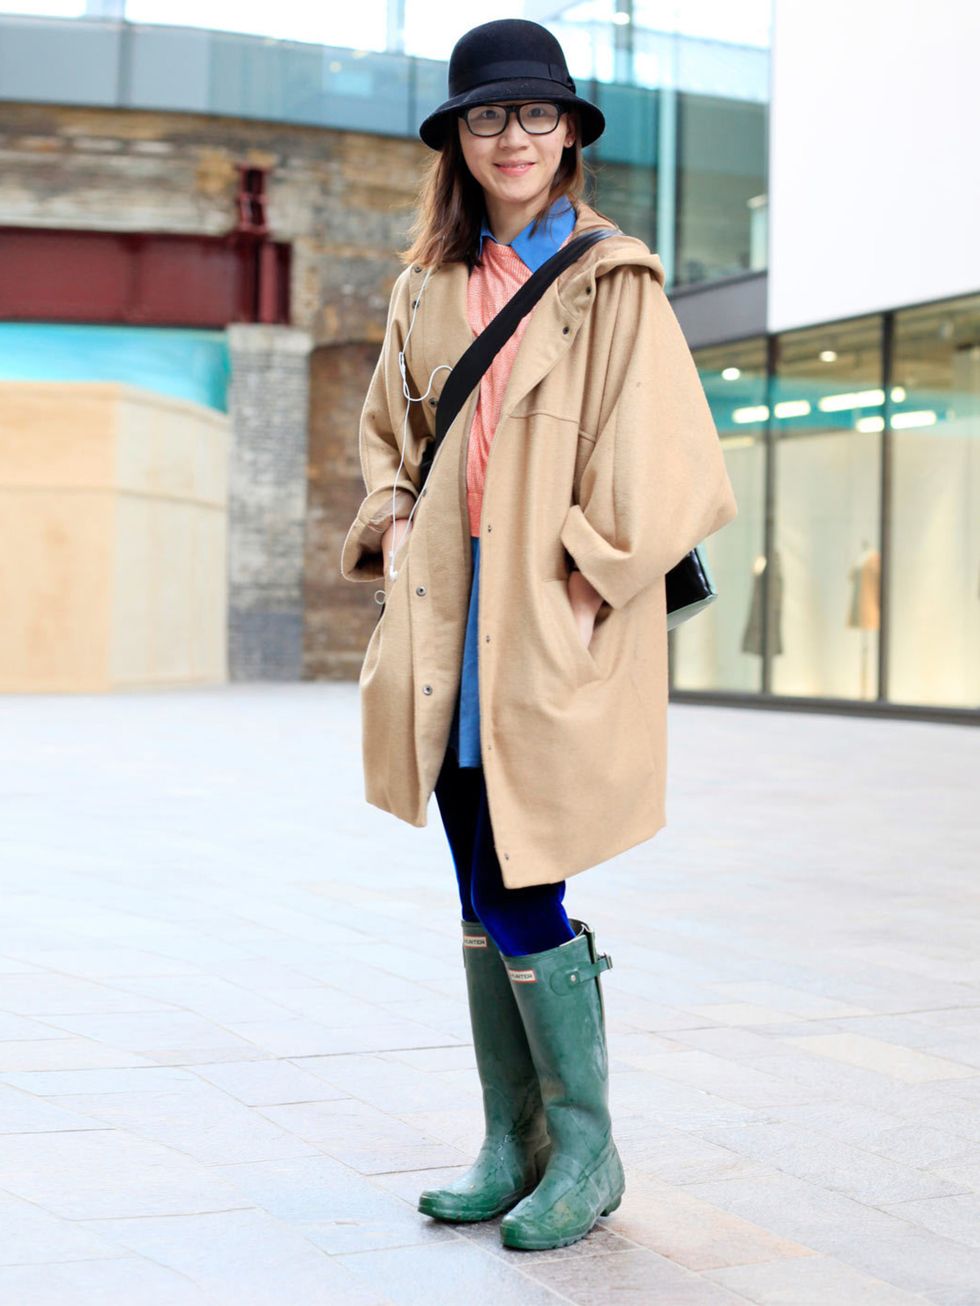 <p>Riqi, 23, Urban Outfitters hat, Cheap Monday coat, Cos top, Hunter wellies.</p><p>Photo by Silvia Olsen @ Anthea Simm</p>